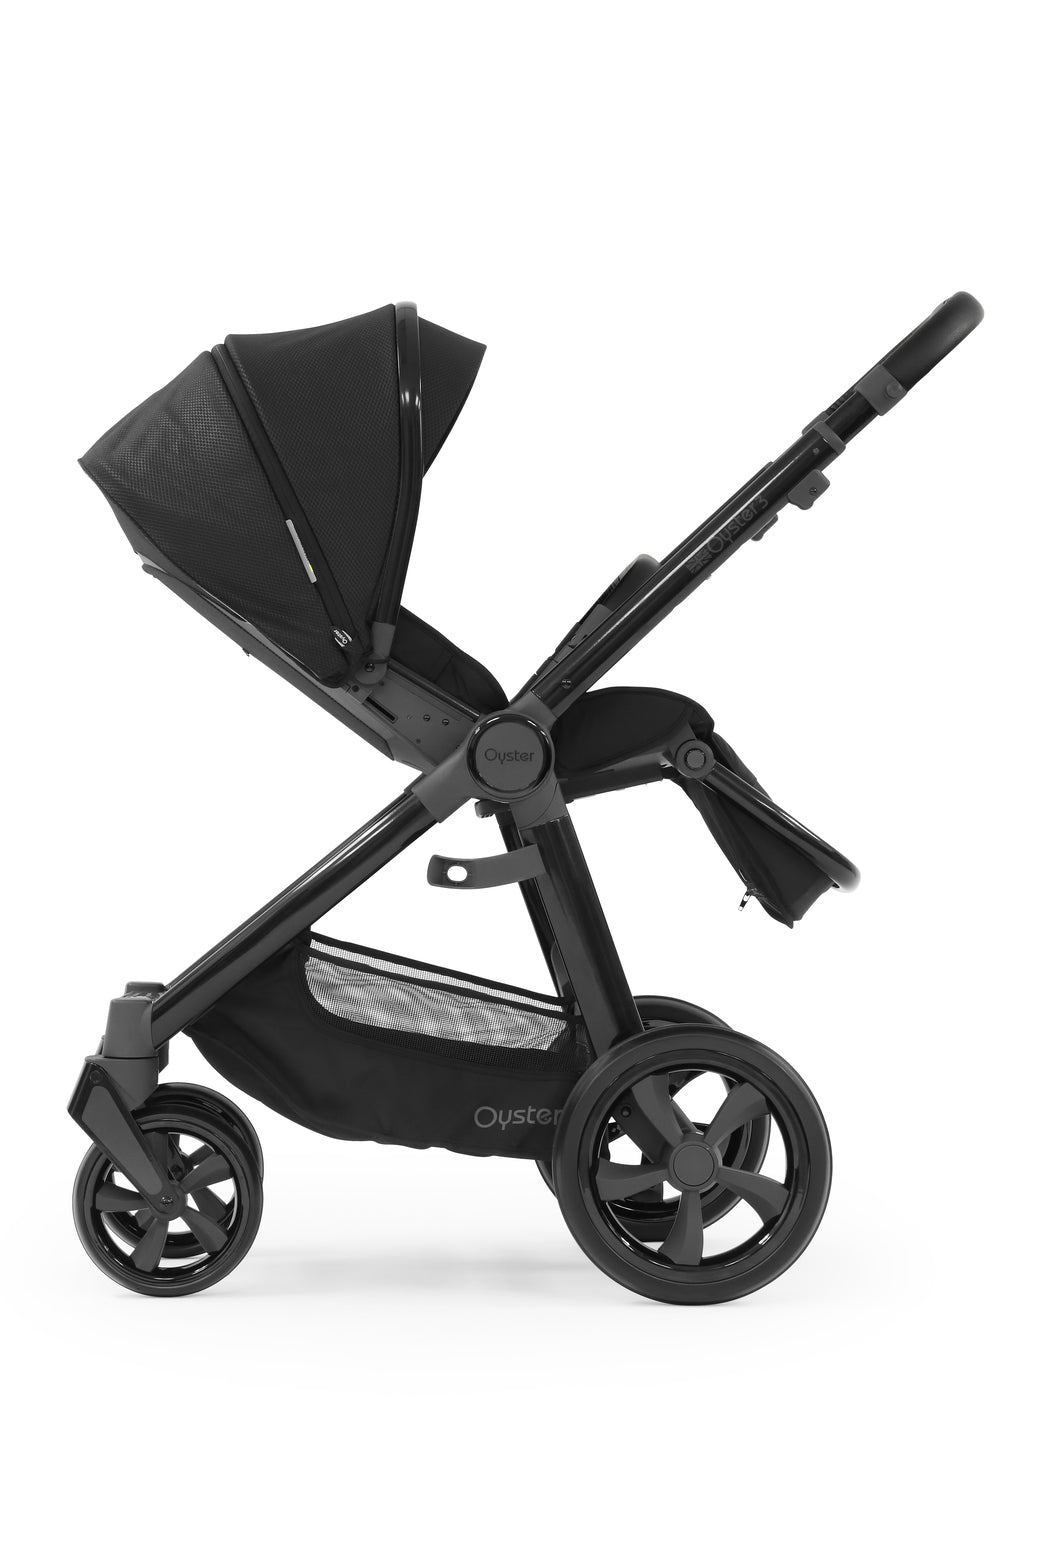 Babystyle Oyster 3 Luxury 7 Piece Travel System Bundle With Cloud T - Pixel - For Your Little One